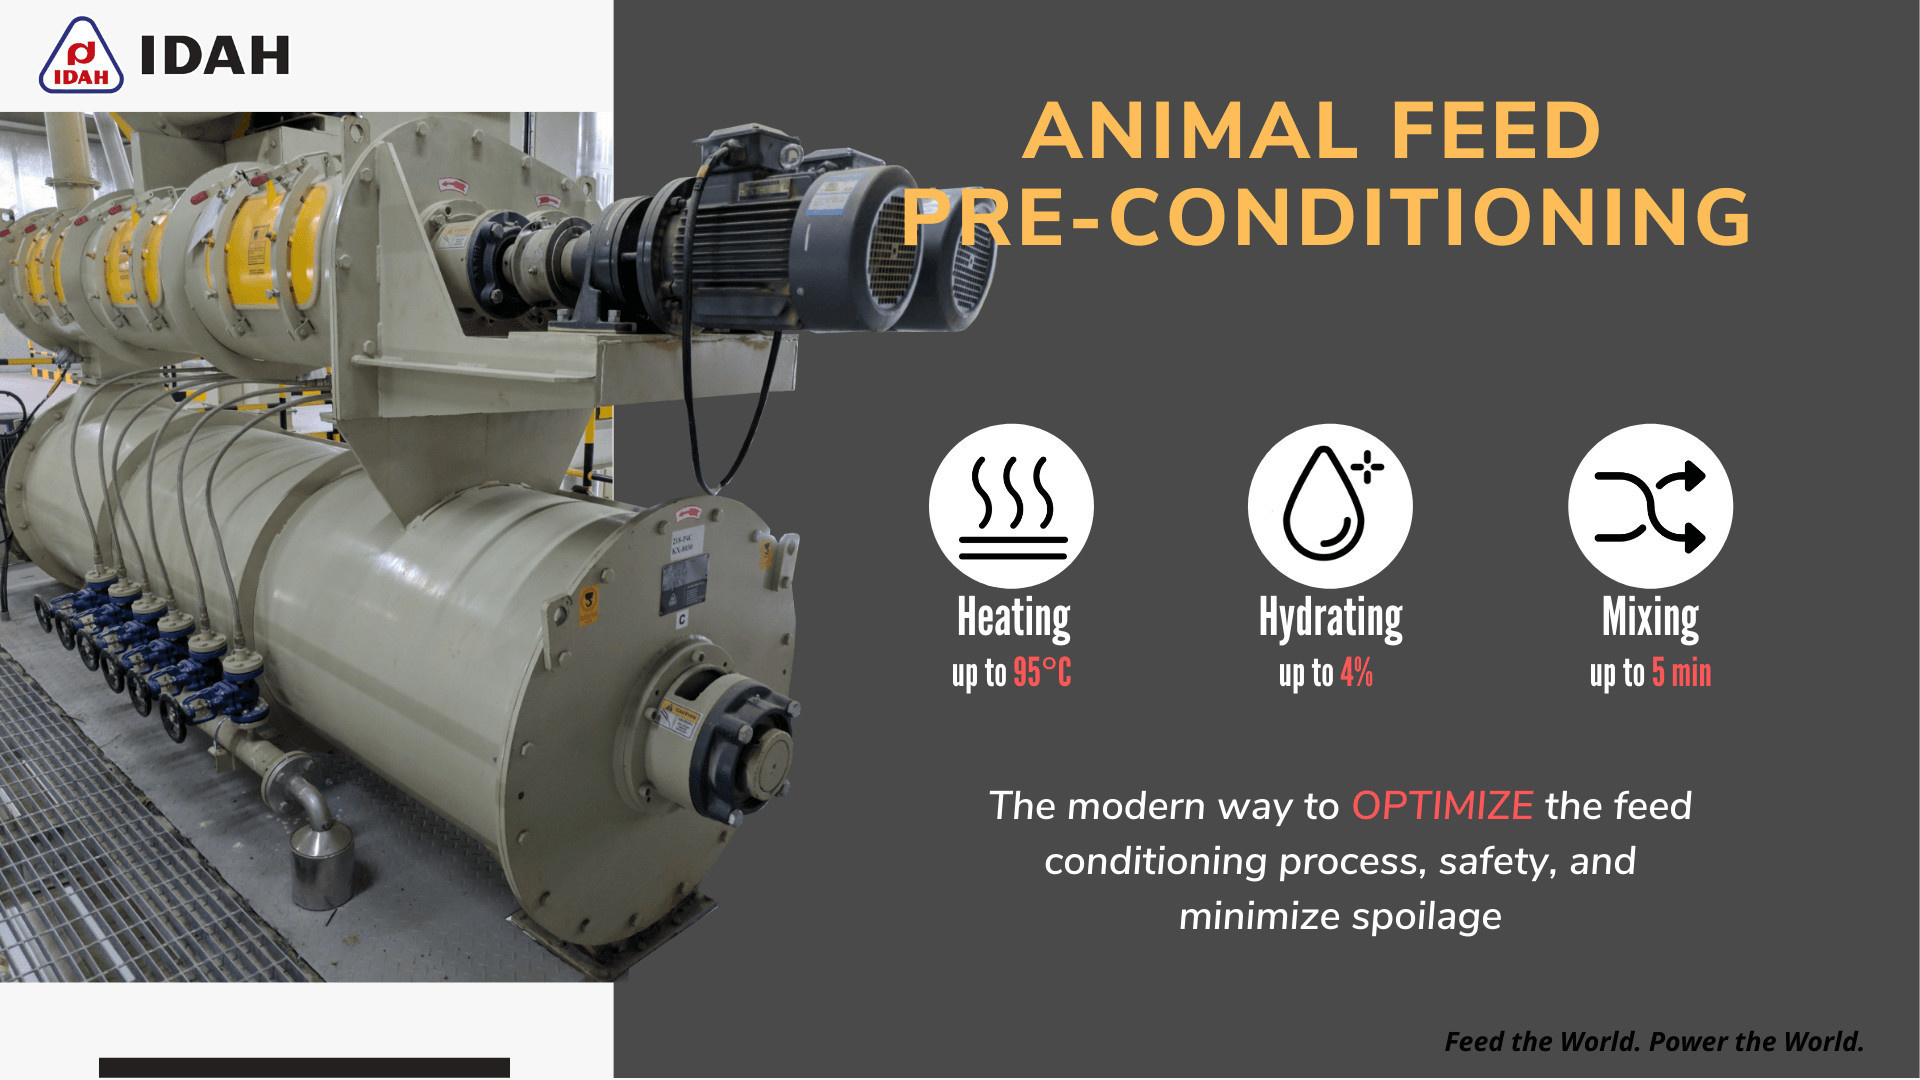 Optimal pre-conditioning for animal feed